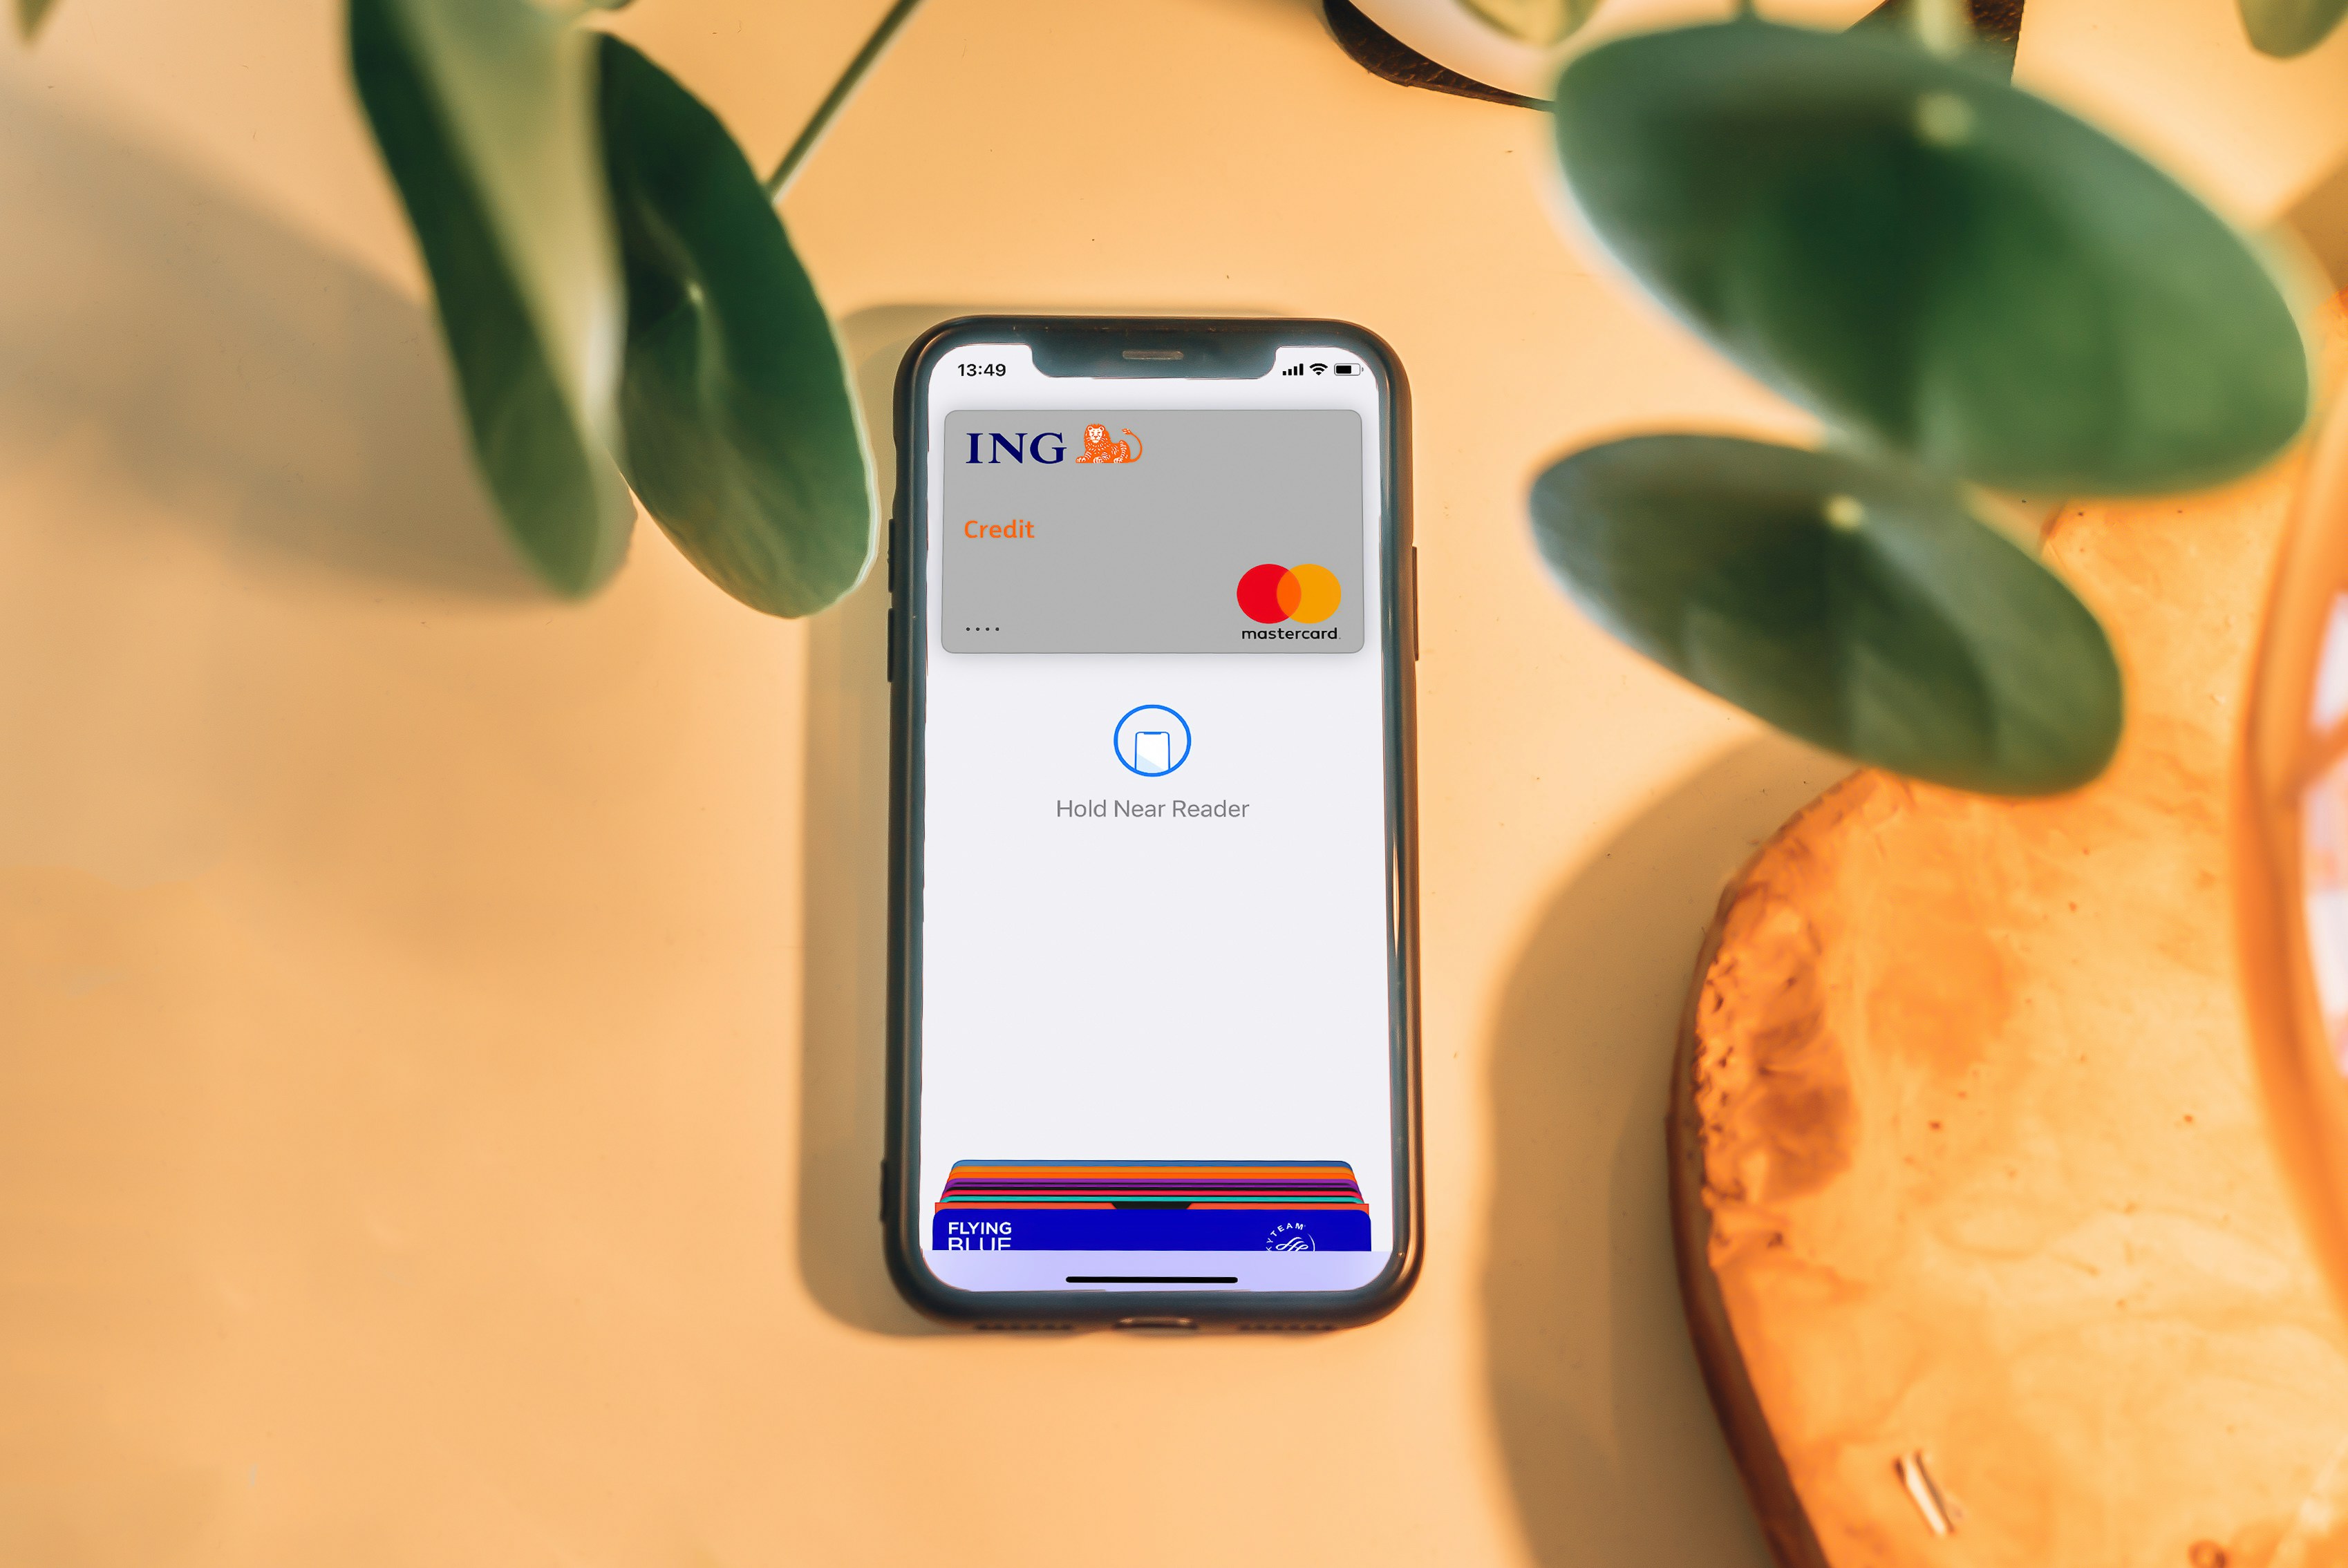 ING just added ApplePay to their services